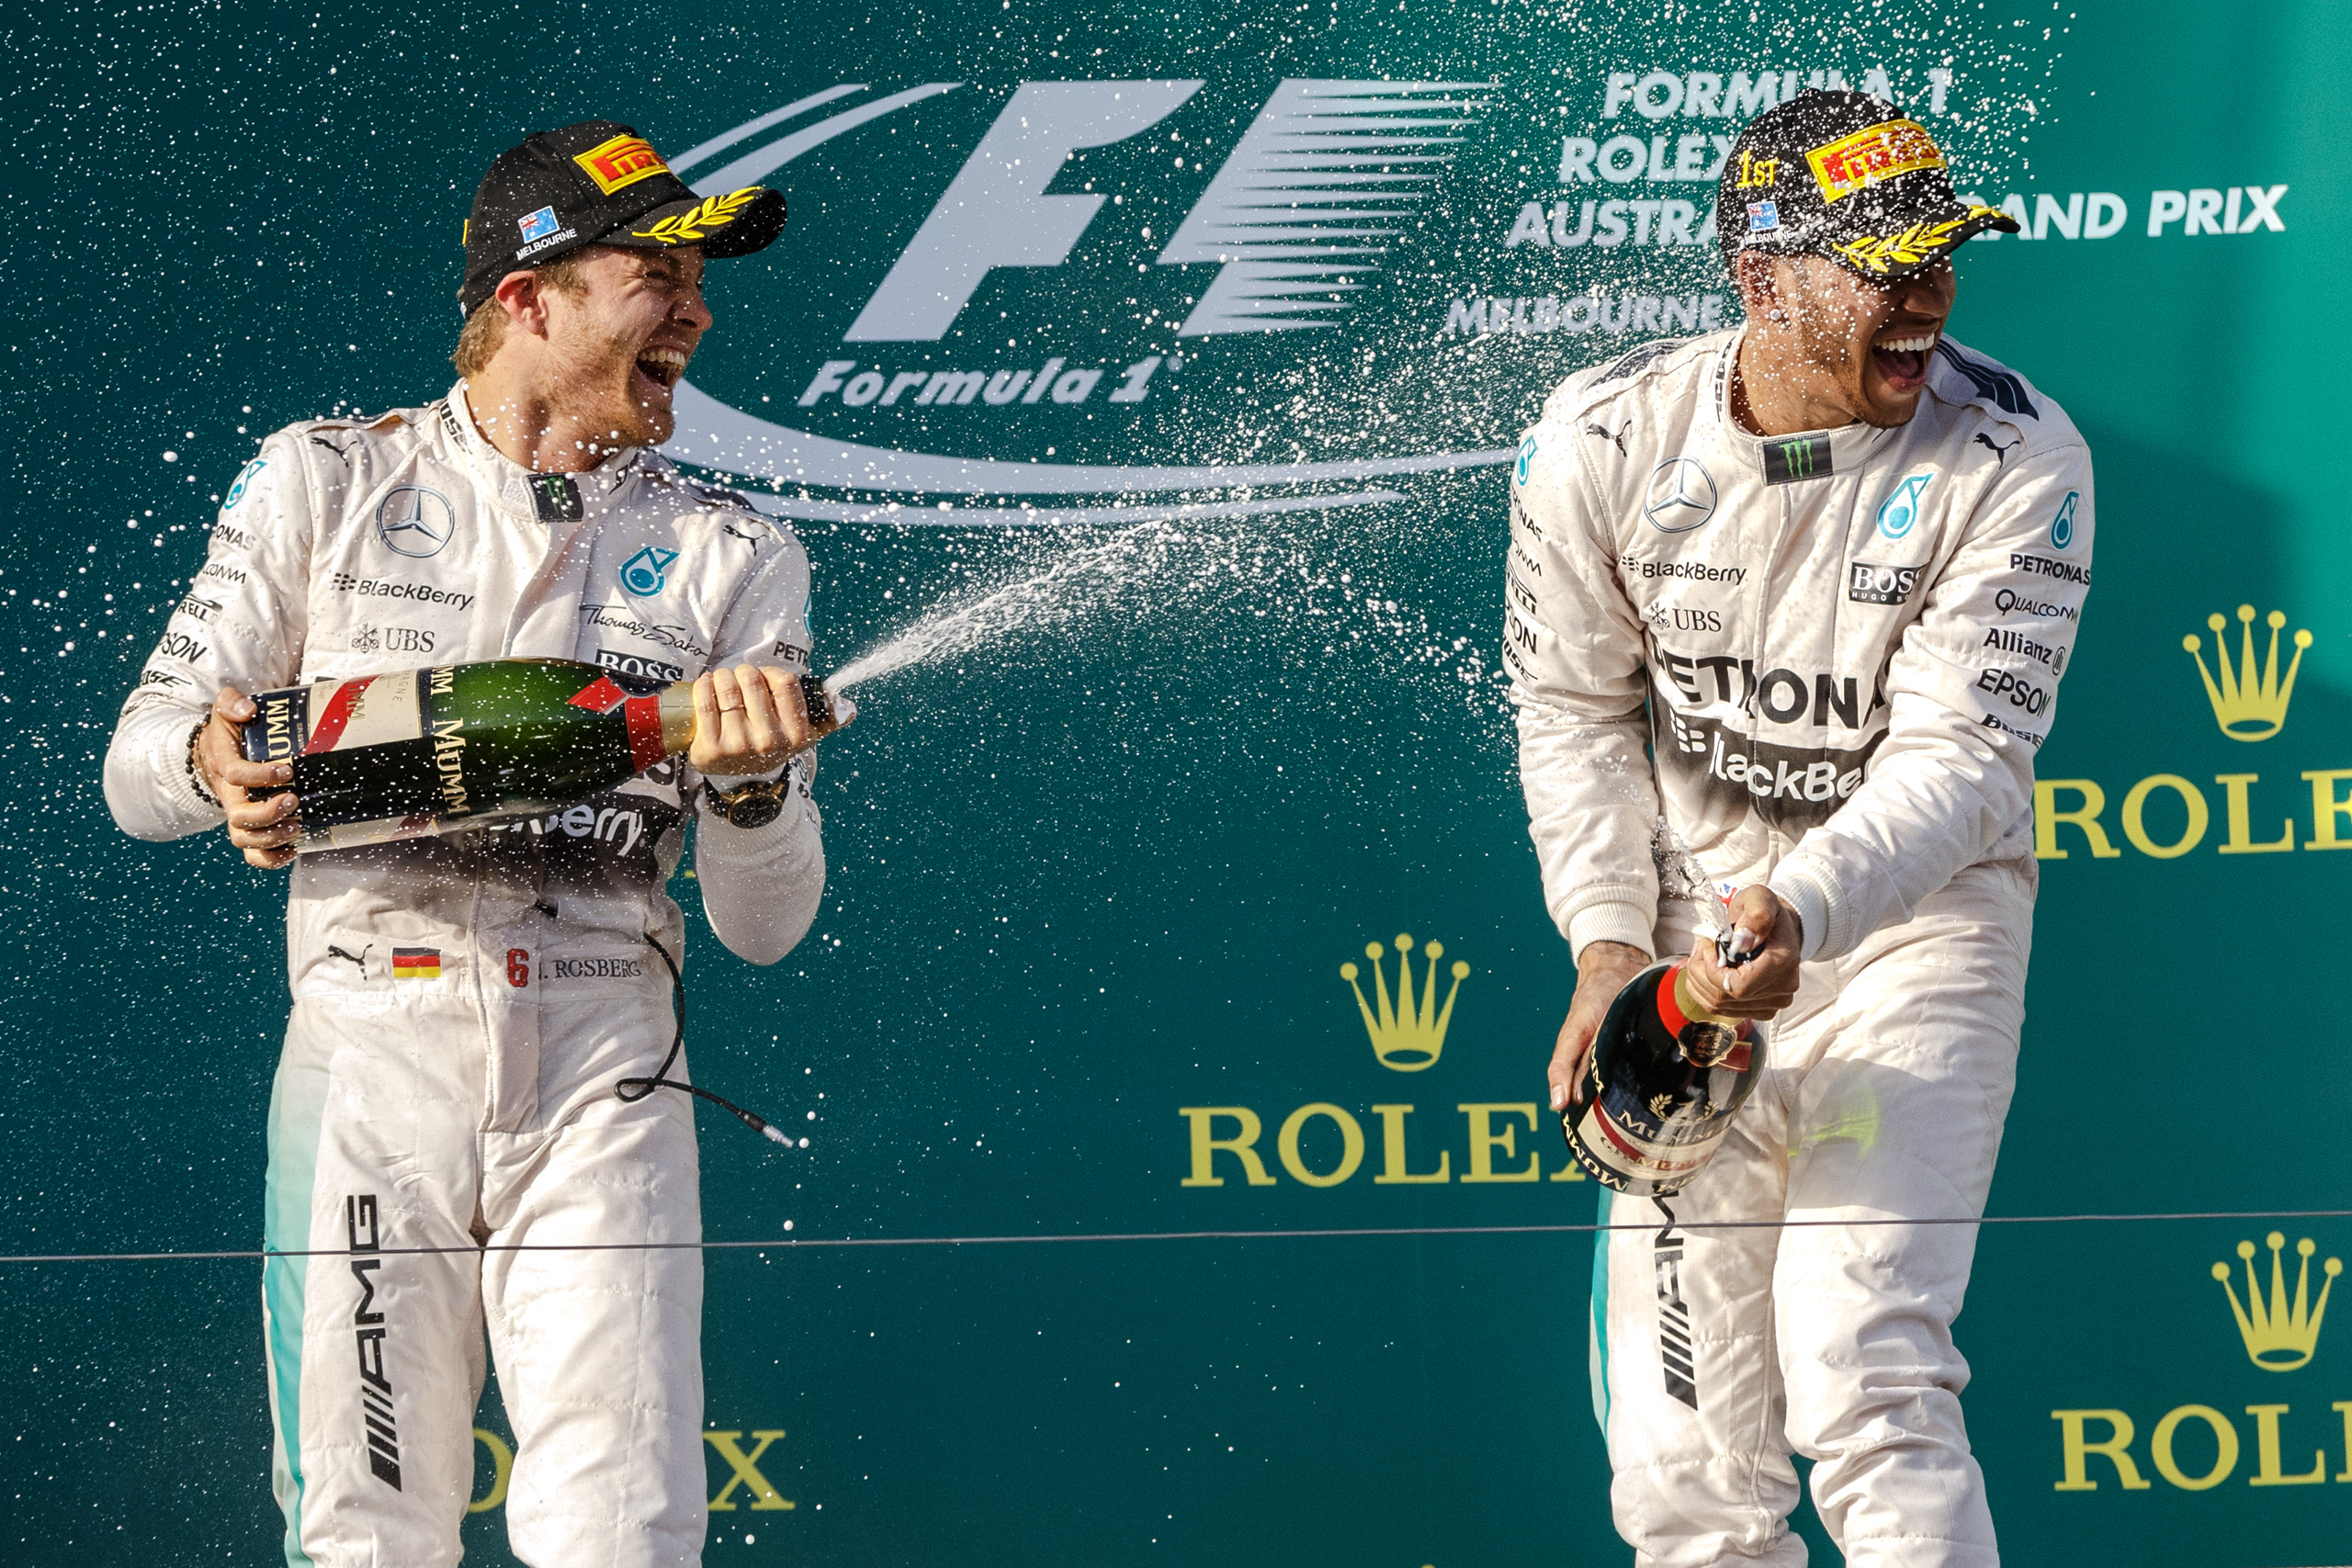 MELBOURNE - March 15, 2015: Lewis Hamilton (GBR) #44 (1st) and Nico Rosberg (DEU) #6 (2nd) spray champagne on the podium at the 2015 Australian Formula One Grand Prix at Albert Park, Melbourne, Australia. 20150315_SSYC4594